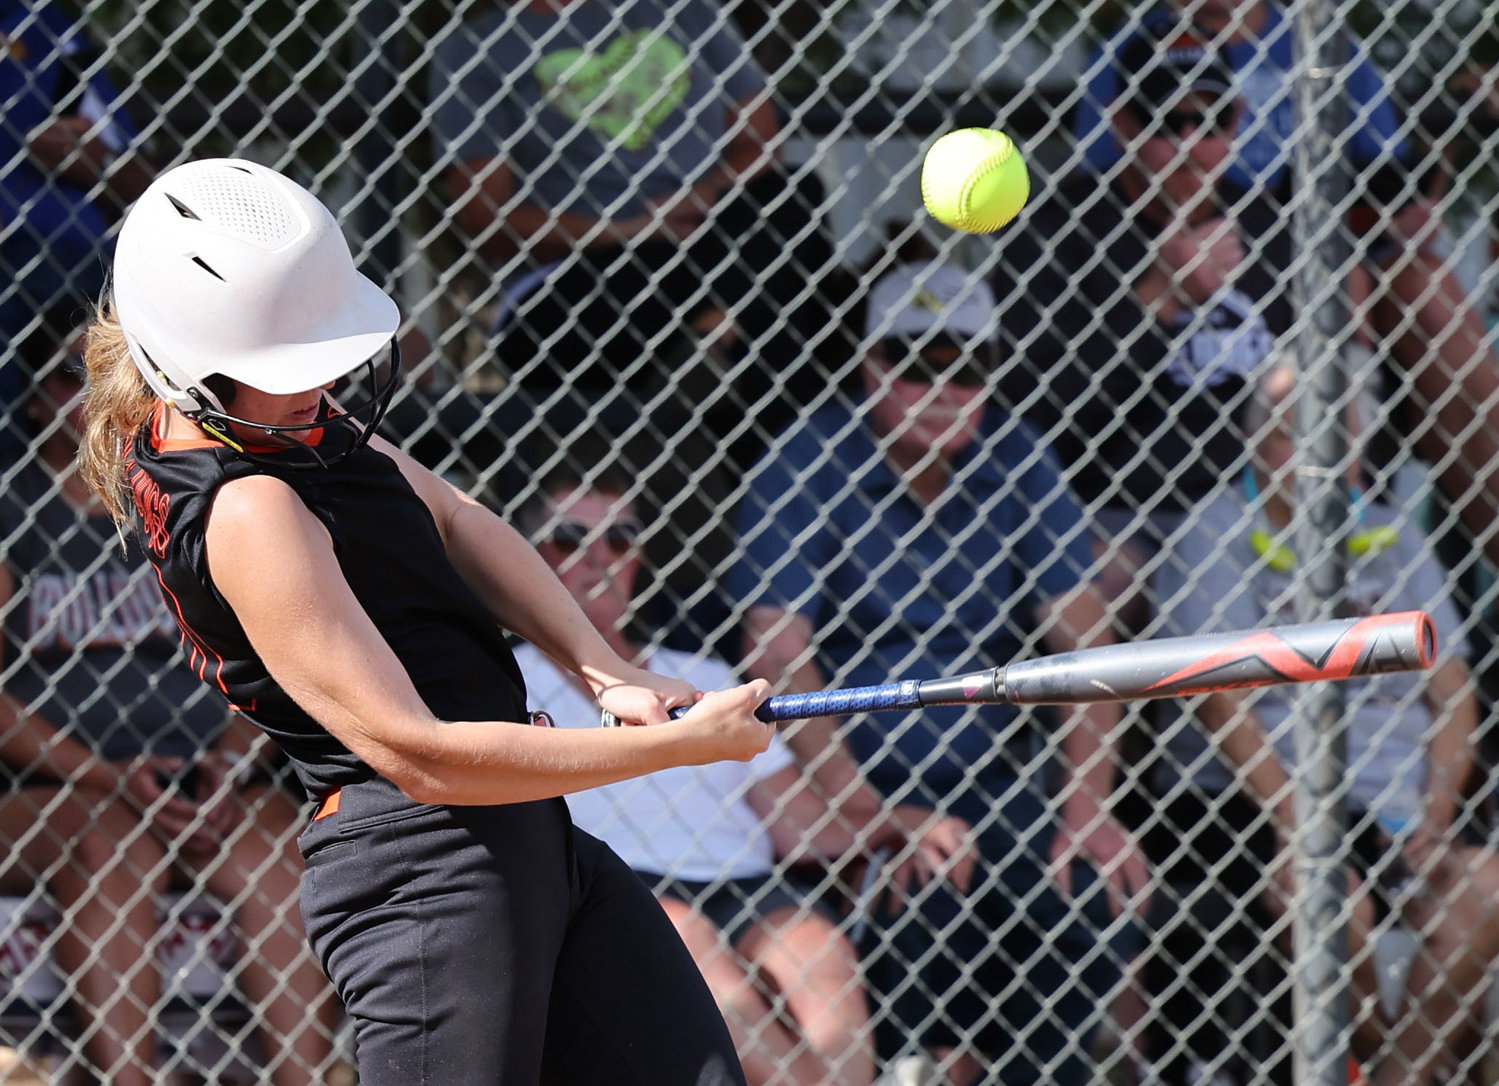 Lexington junior Maison Sissney puts a ball into play for the Bulldogs. Lexington opens the Regional softball tournament today (Thursday) at Lindsay against Newkirk at 2 p.m.